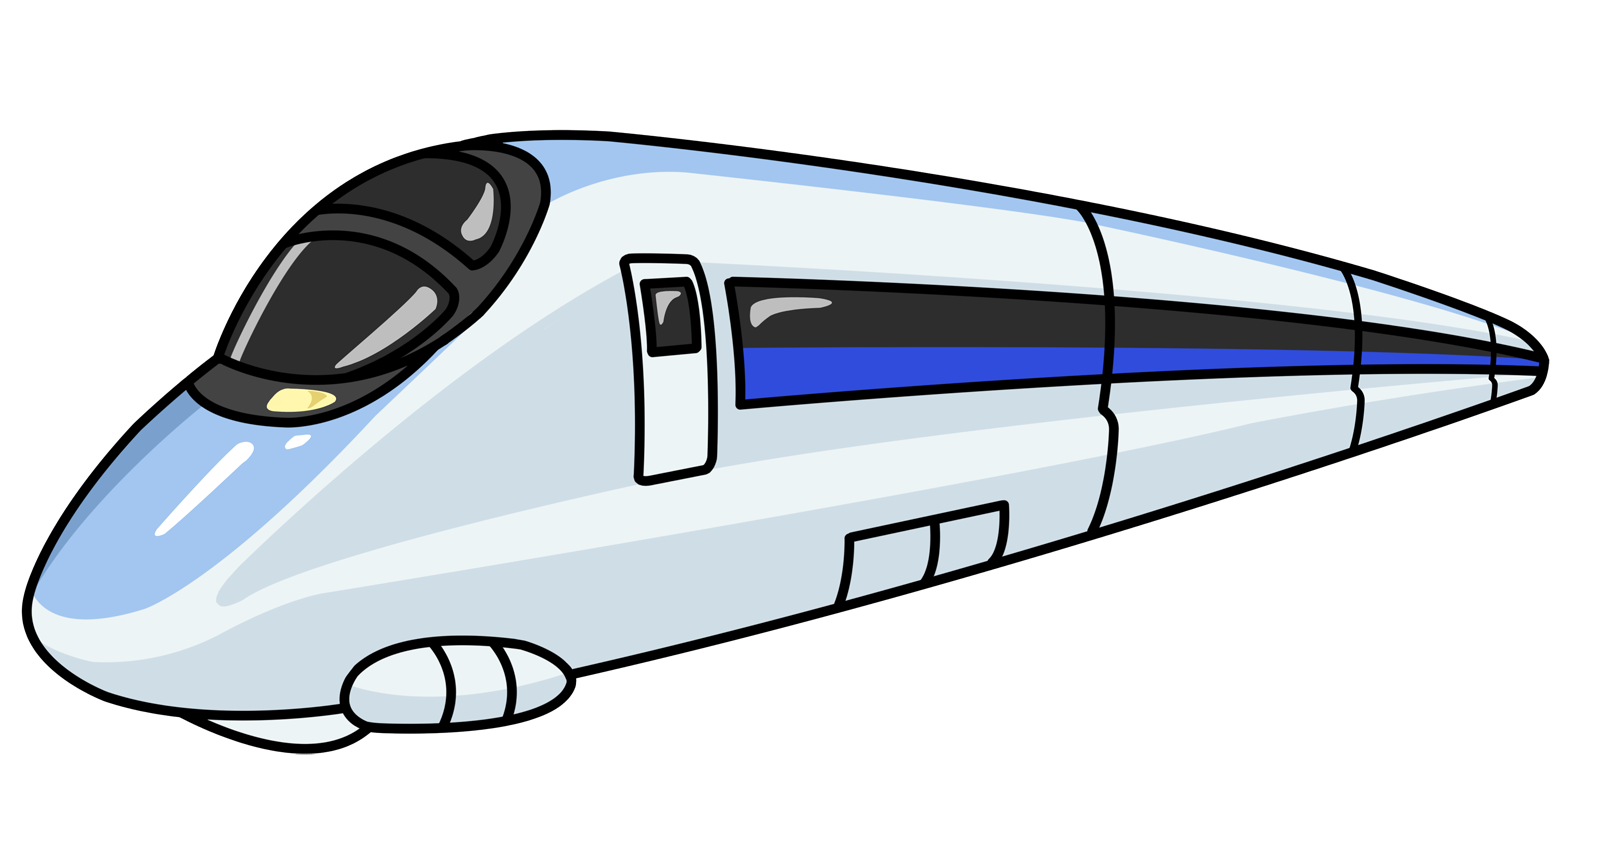 Cartoon Pictures Of Trains - ClipArt Best